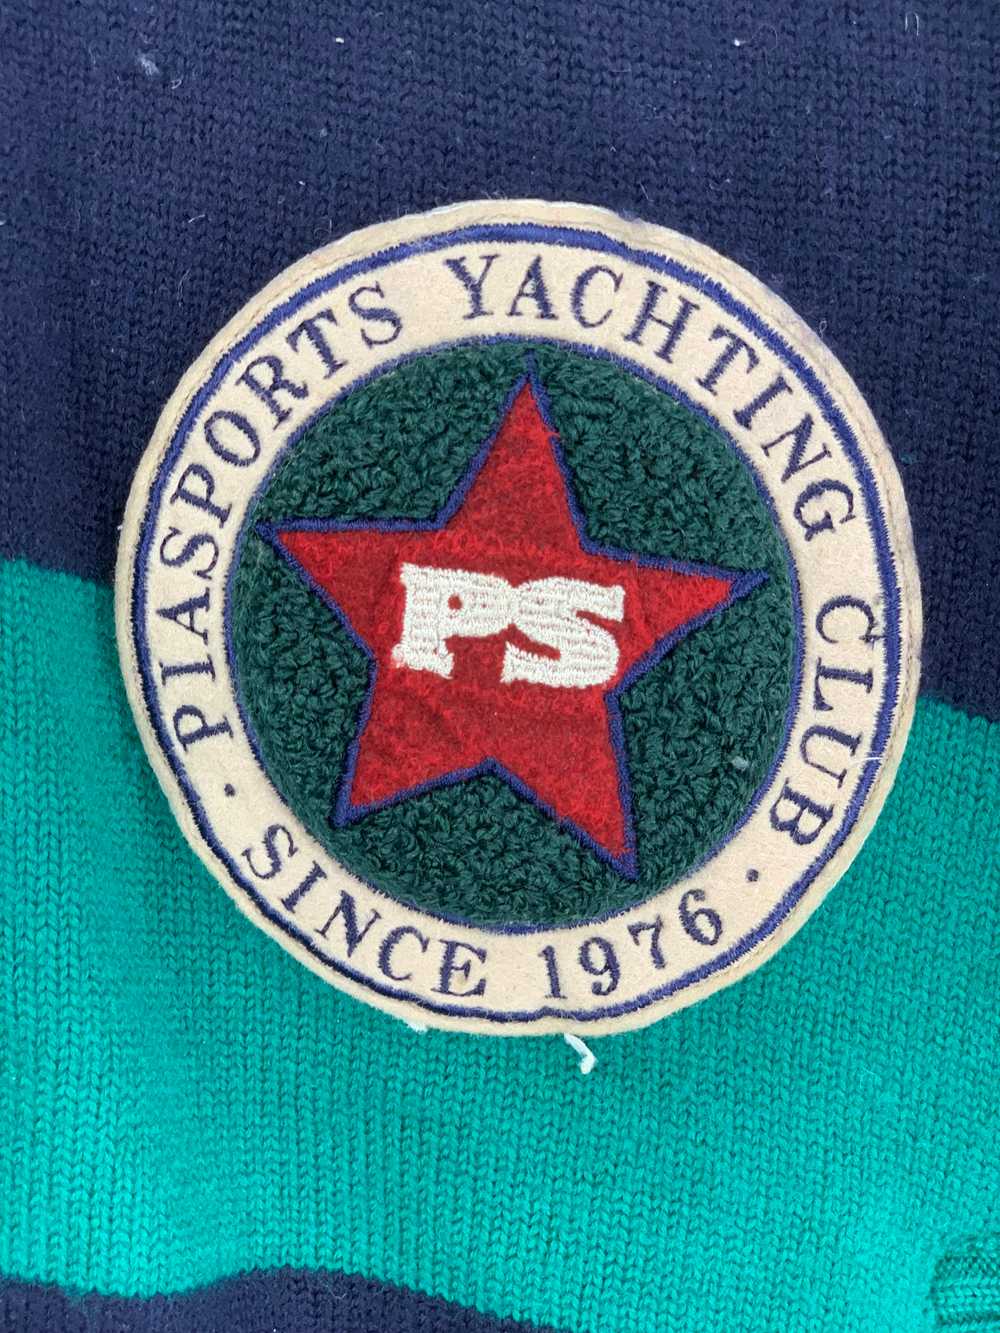 Vintage - Vintage Pia Sports Yachting Club Bomber… - image 12